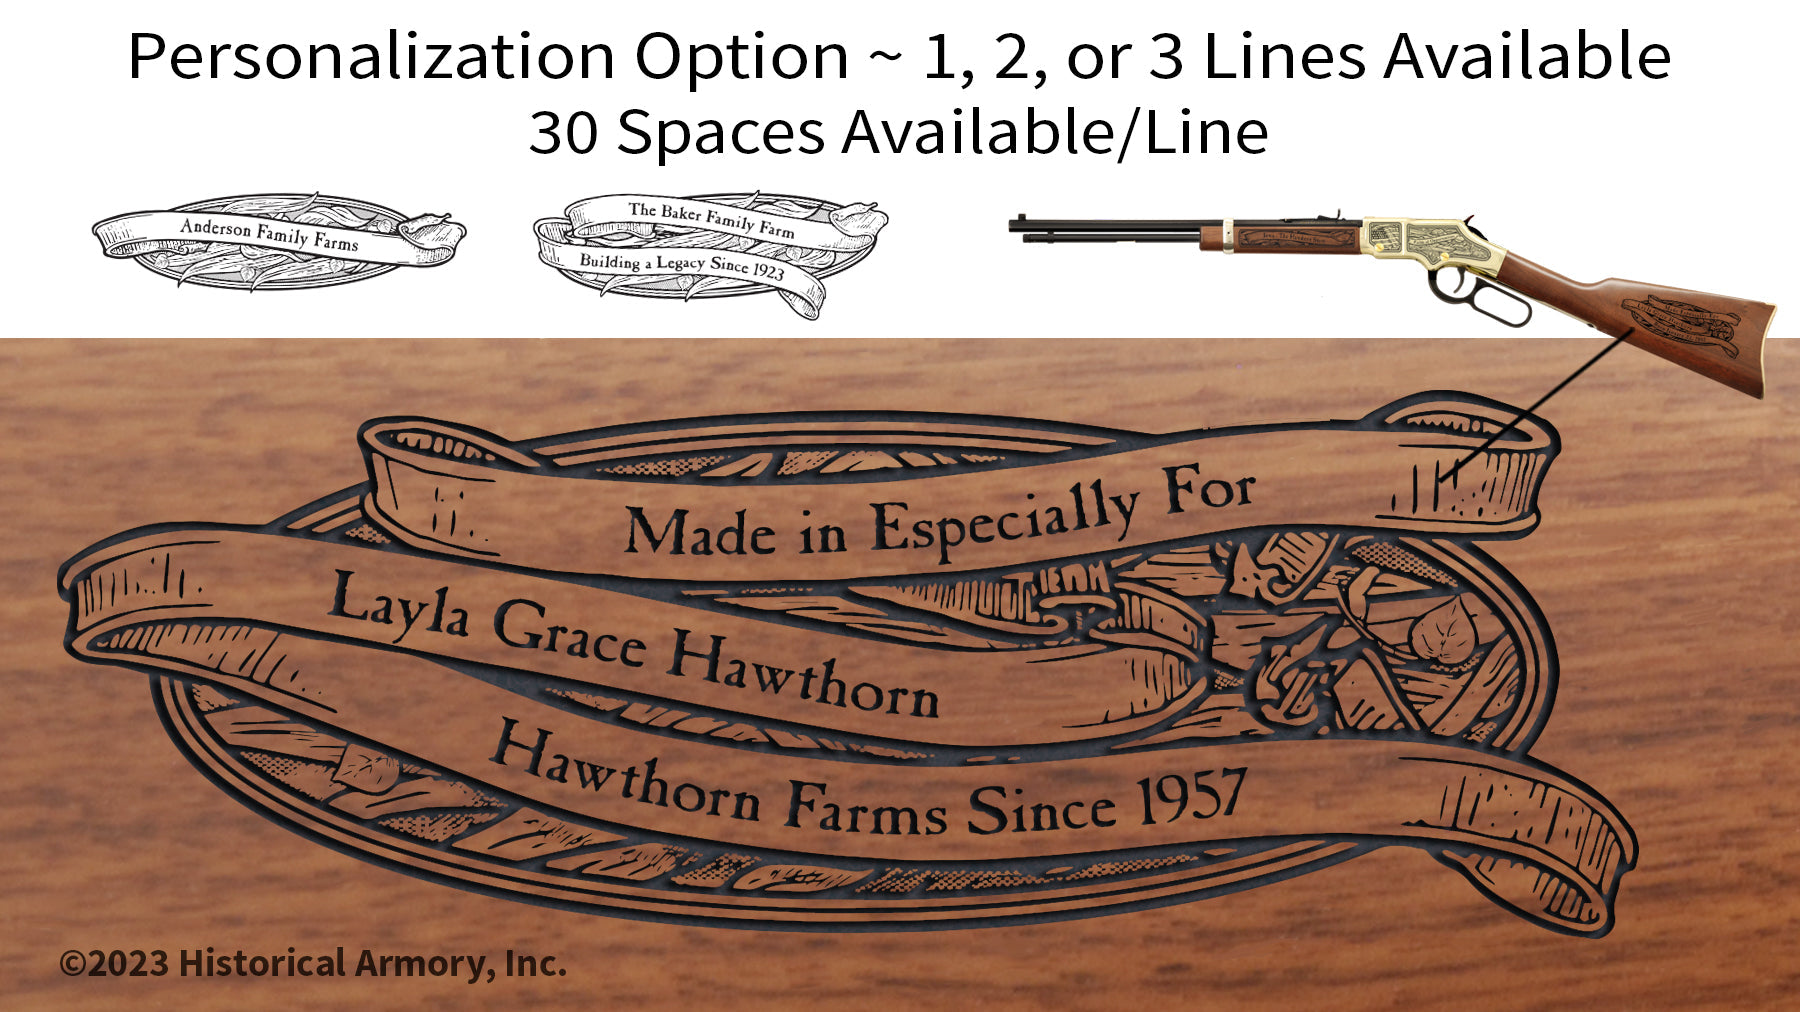 Missouri Agricultural Heritage Engraved Rifle Personalization